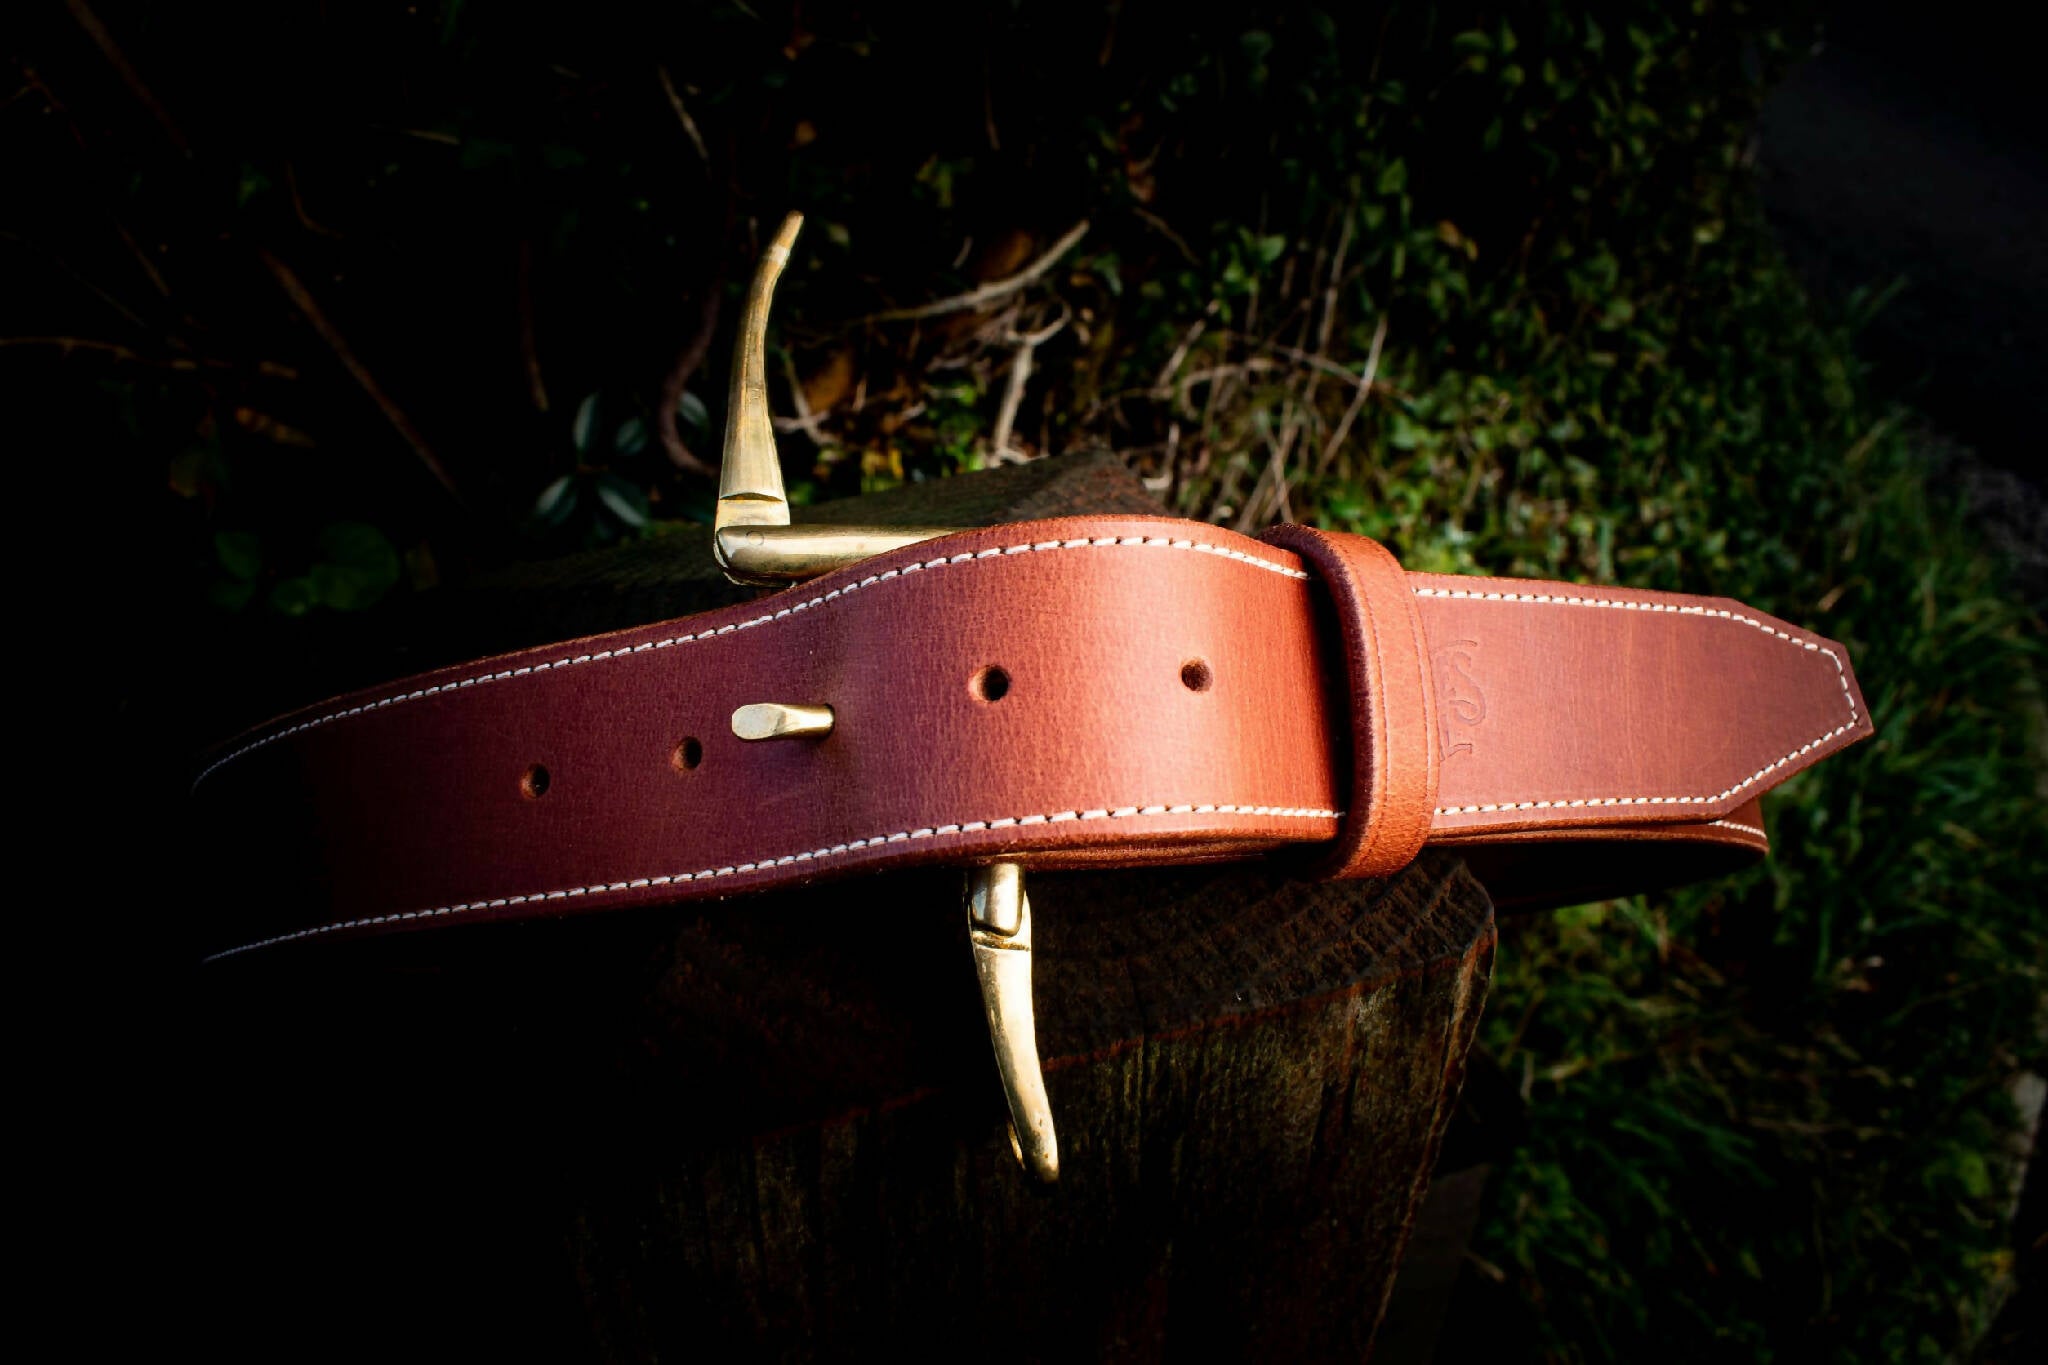 Leather belt with New York fireman's buckle